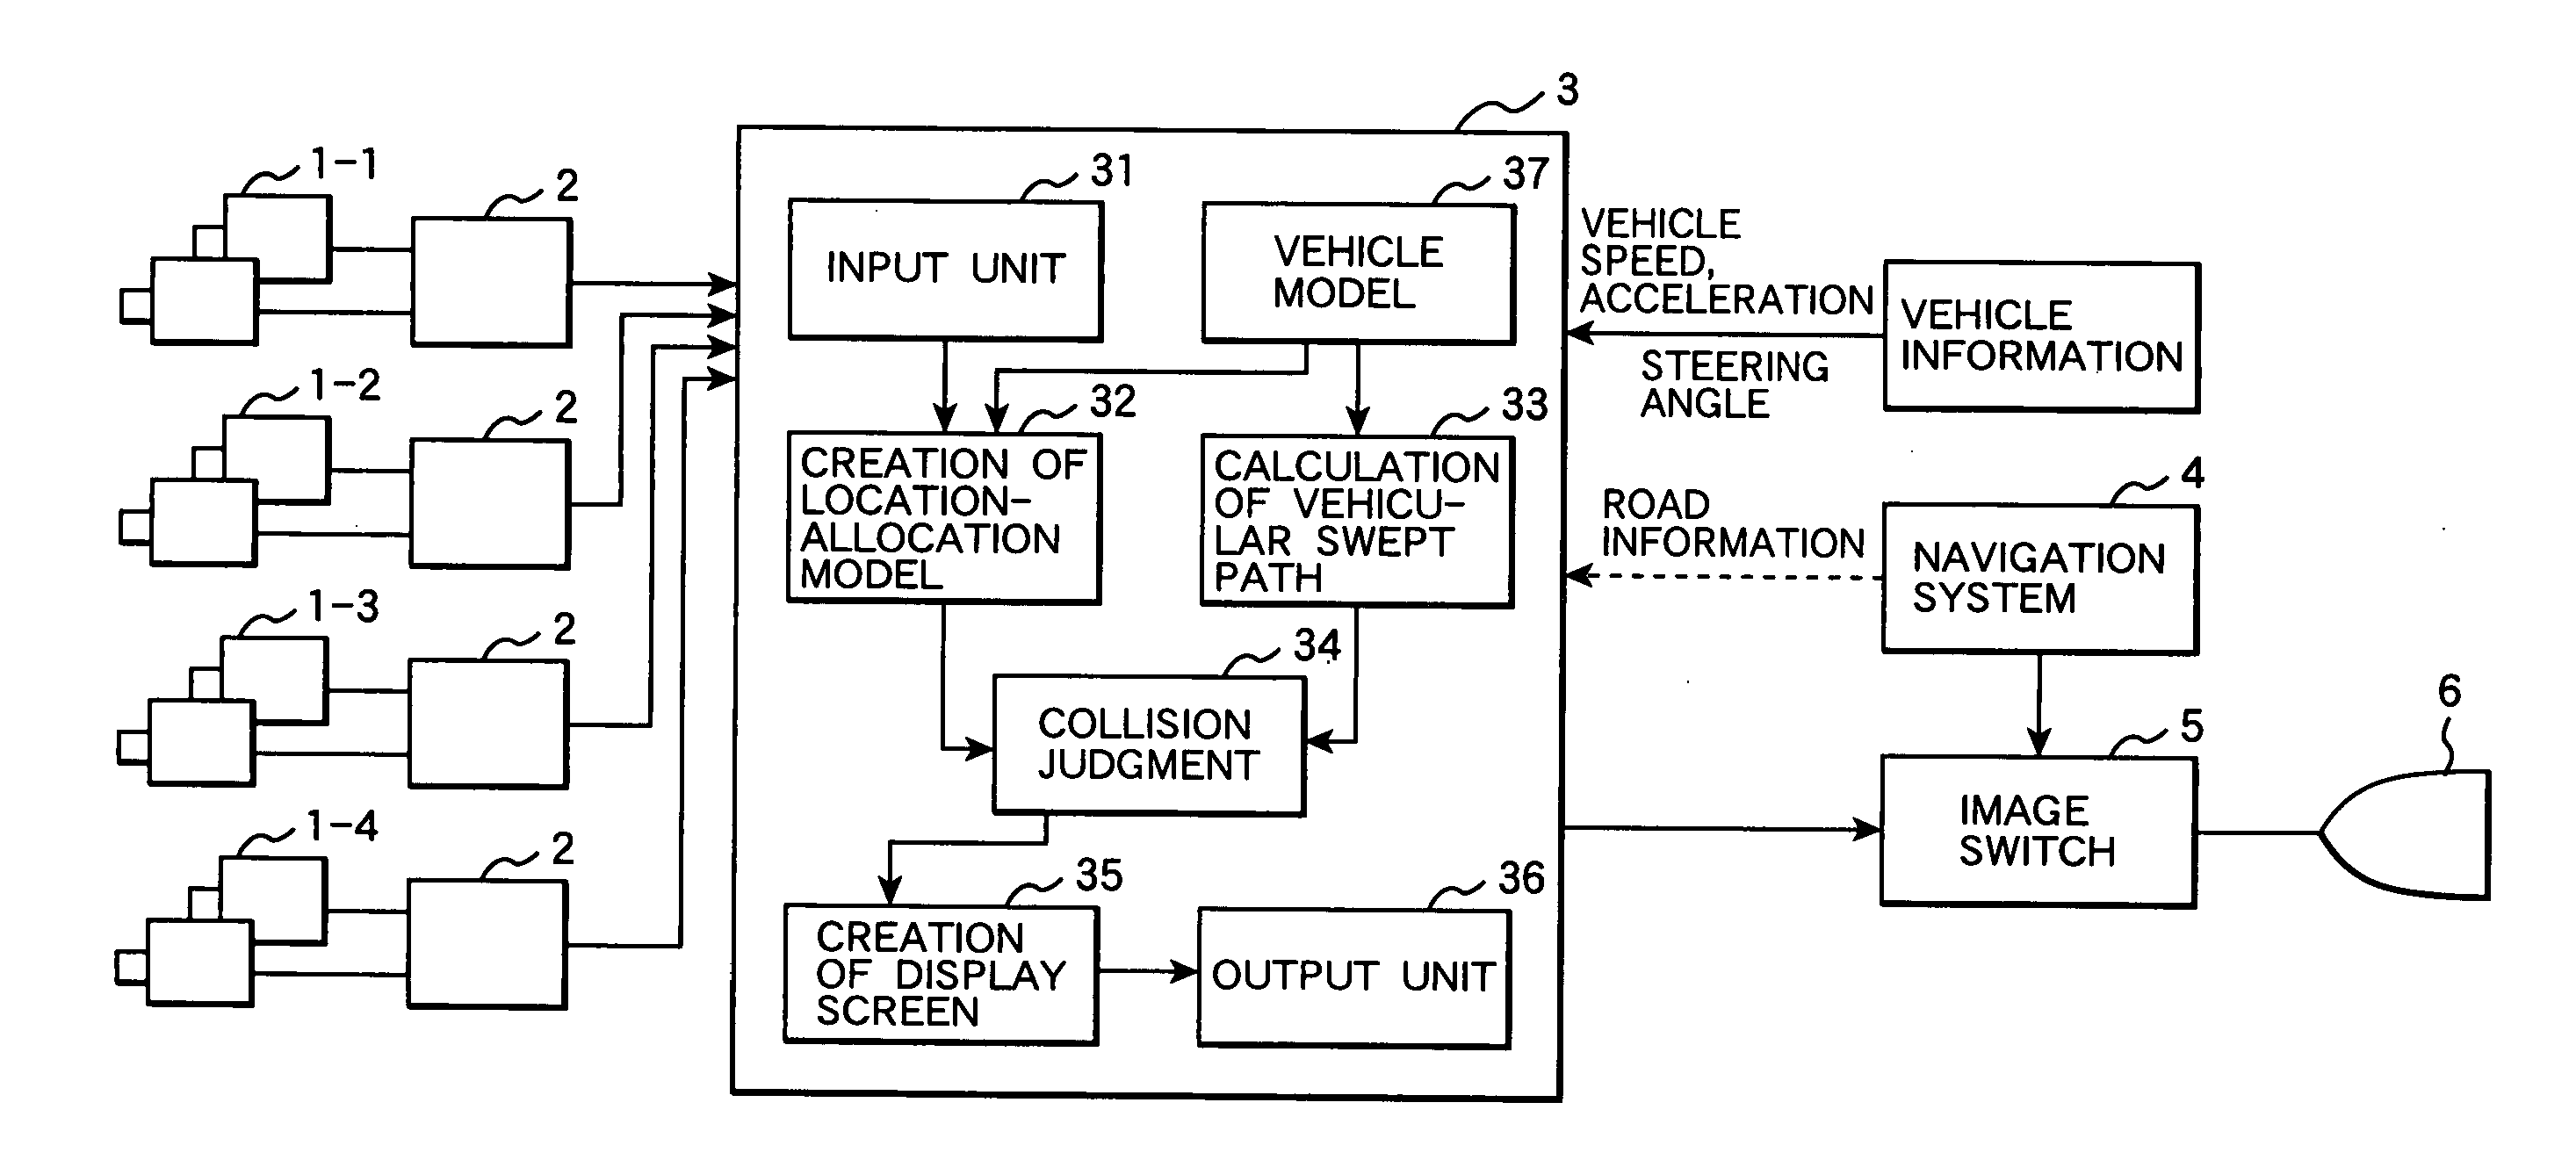 Method and system of monitoring around a vehicle